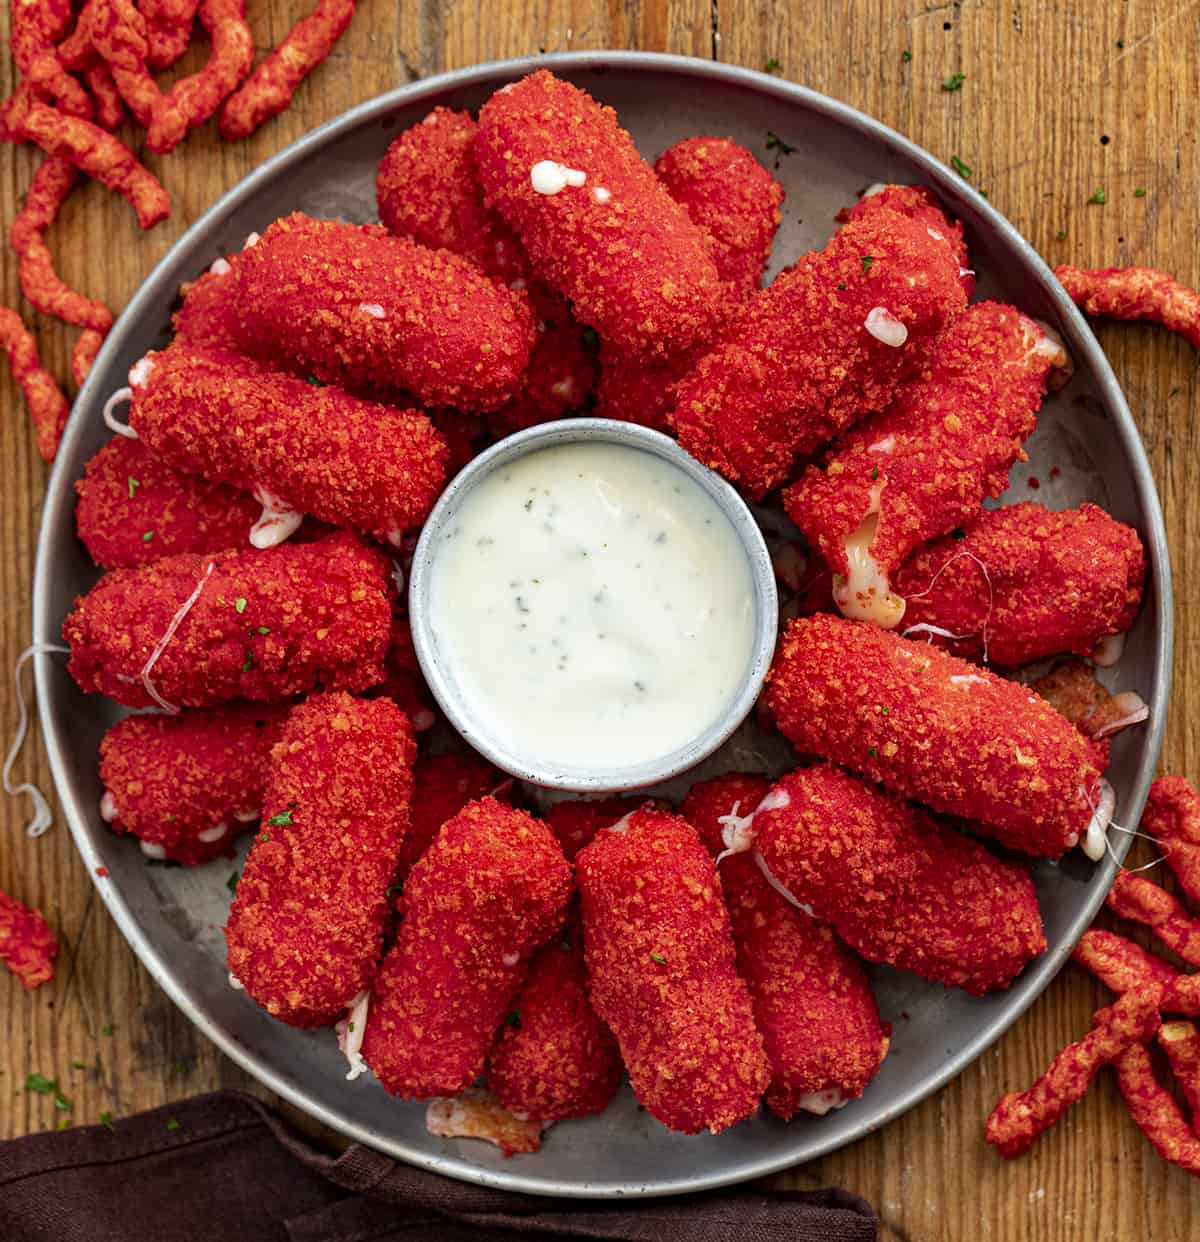 Hot Flamin Hot Cheeto Mozzarella Sticks on a Plate with Ranch Dressing. Appetizer, Cheese Sticks, Flamin Hot Cheese Sticks, SuperBowl Food, Football Snacks, Cheese Sticks Recipes, Football Appetizer Ideas, Party Appetizer Ideas, i am homesteader, iamhomesteader